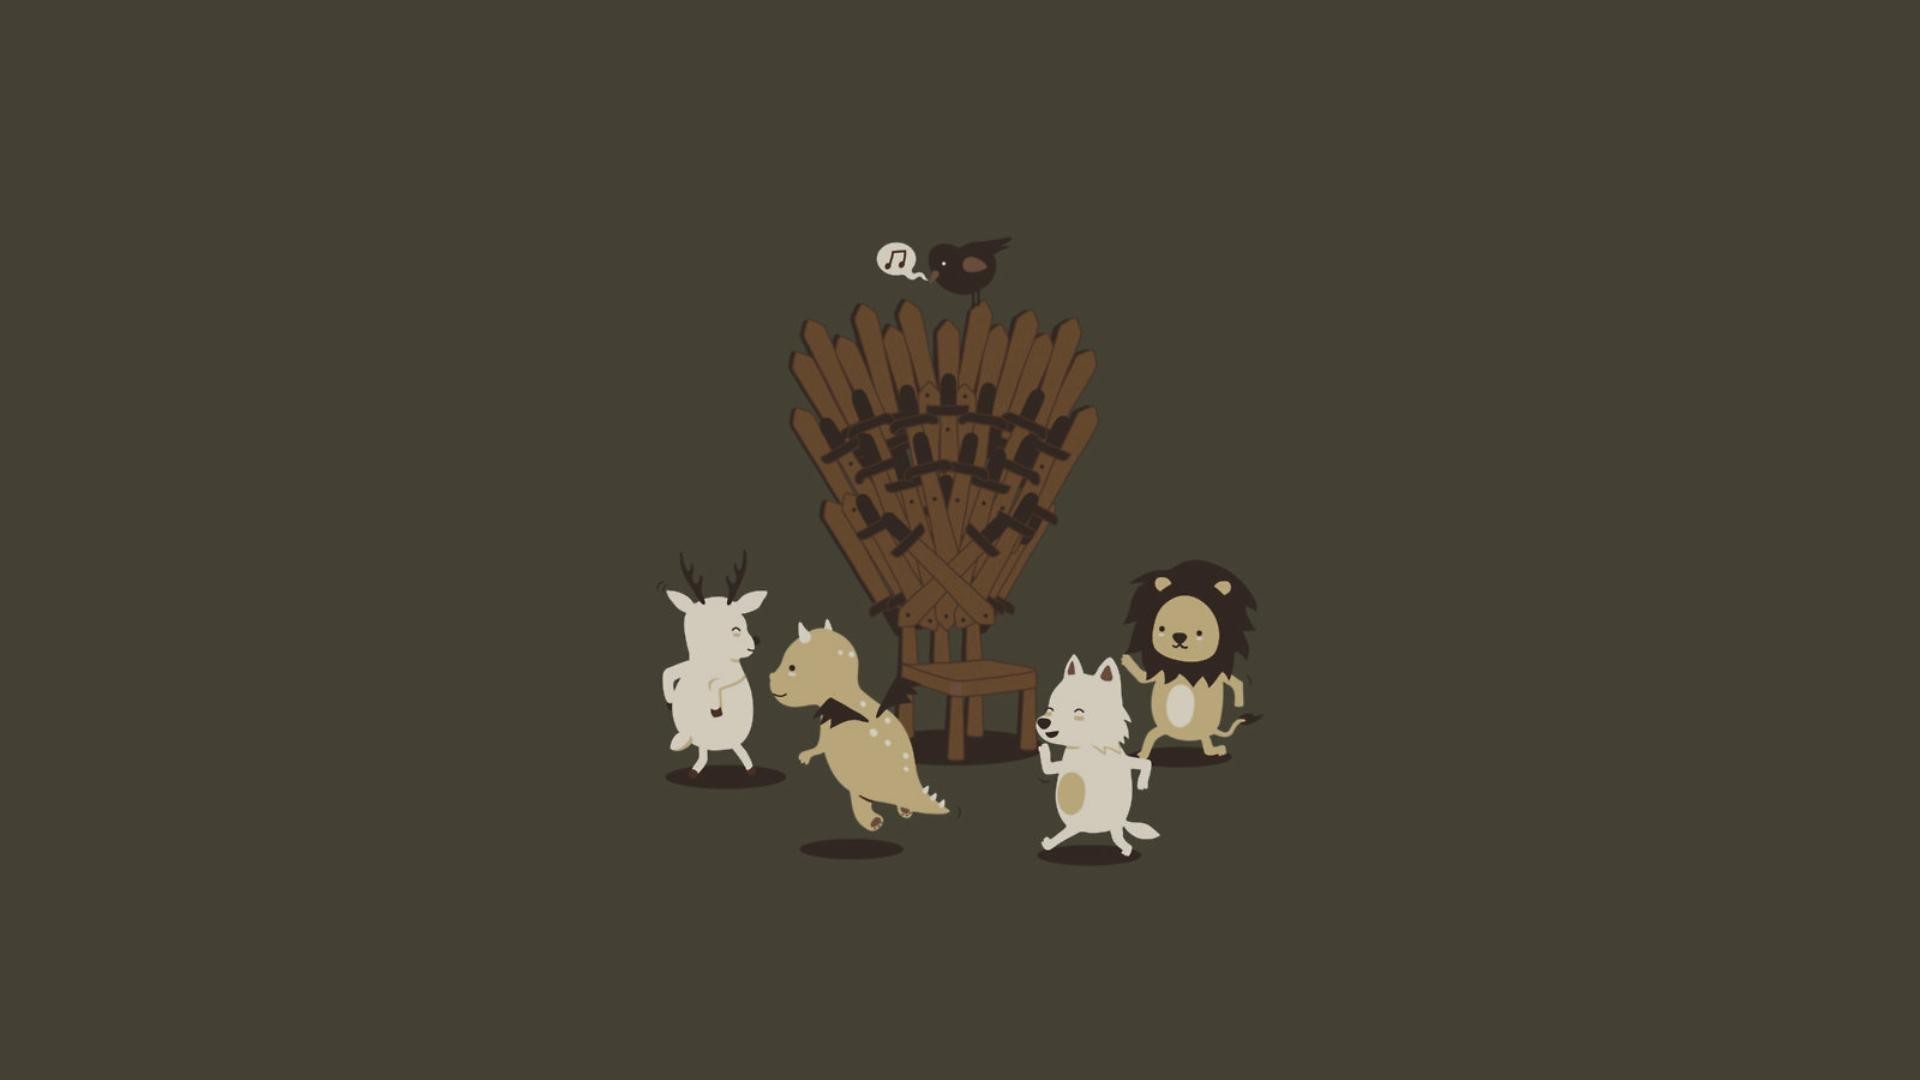 A Song Of Ice And Fire Dance Deer Dragons Funny Game Thrones House Baratheon Lannister Stark Targaryen Lions Minimalistic Throne Wolves